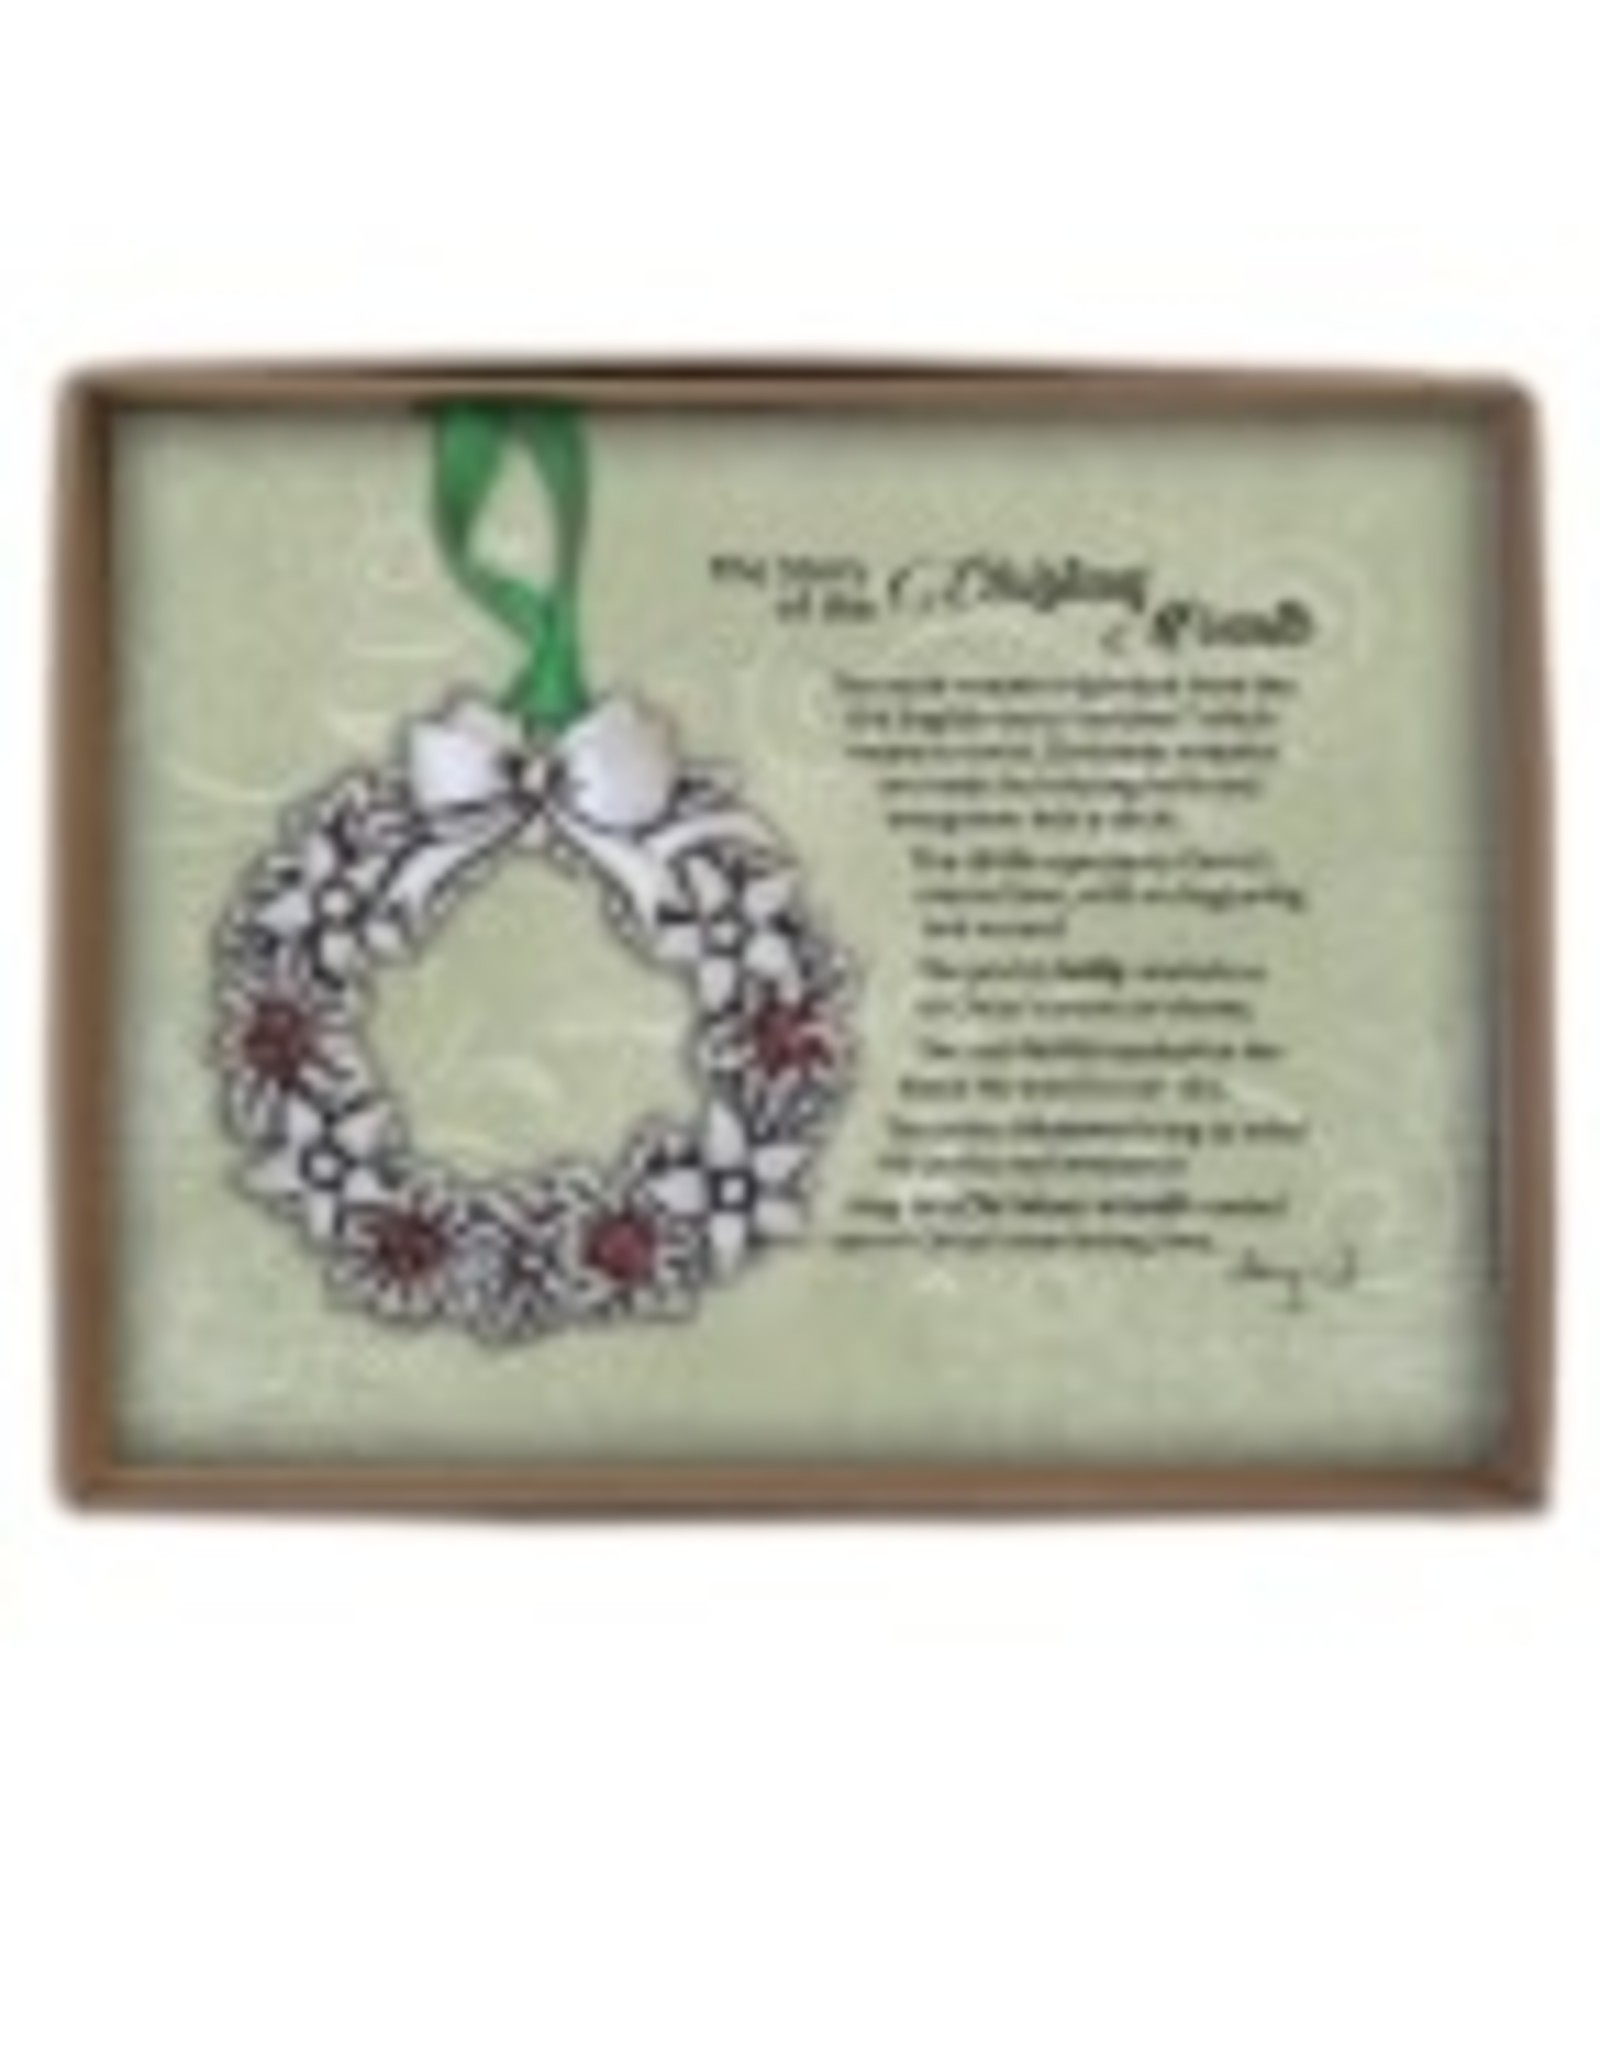 Abbey + CA Gift Christmas Wreath Ornament w/Green Ribbon, Gift Boxed